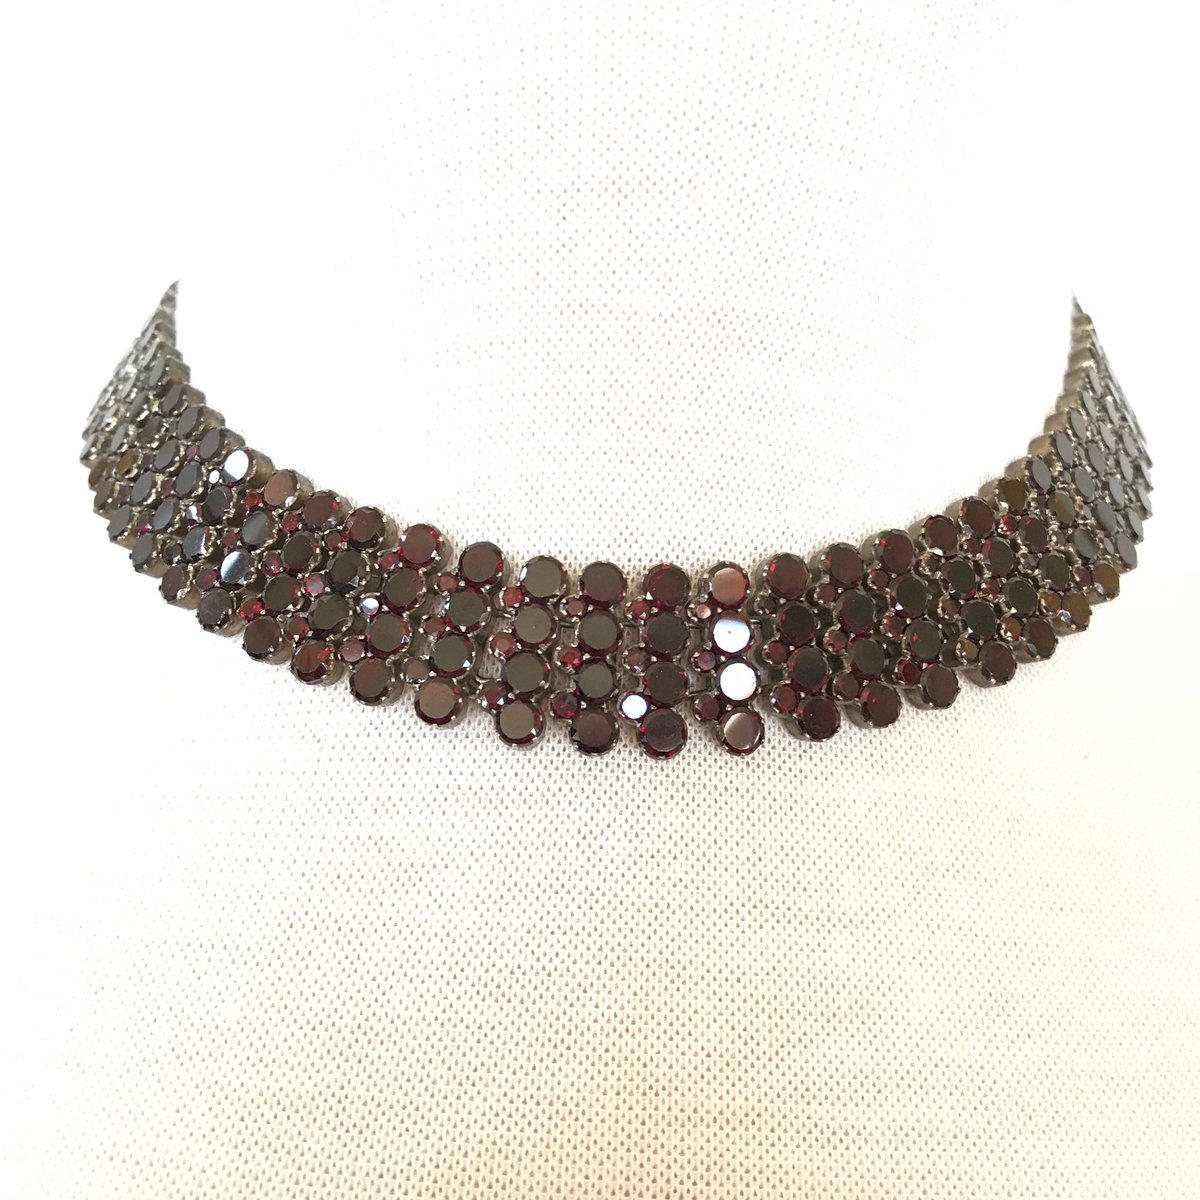 25% Off Sale 2 Days Only #etsy shop: Impossible to find Flat cut #bohemian #garnet #necklace #jewelry #red #engagementgifts #anniversarygifts #bridalgifts #christmasgifts etsy.me/2ME5kpt